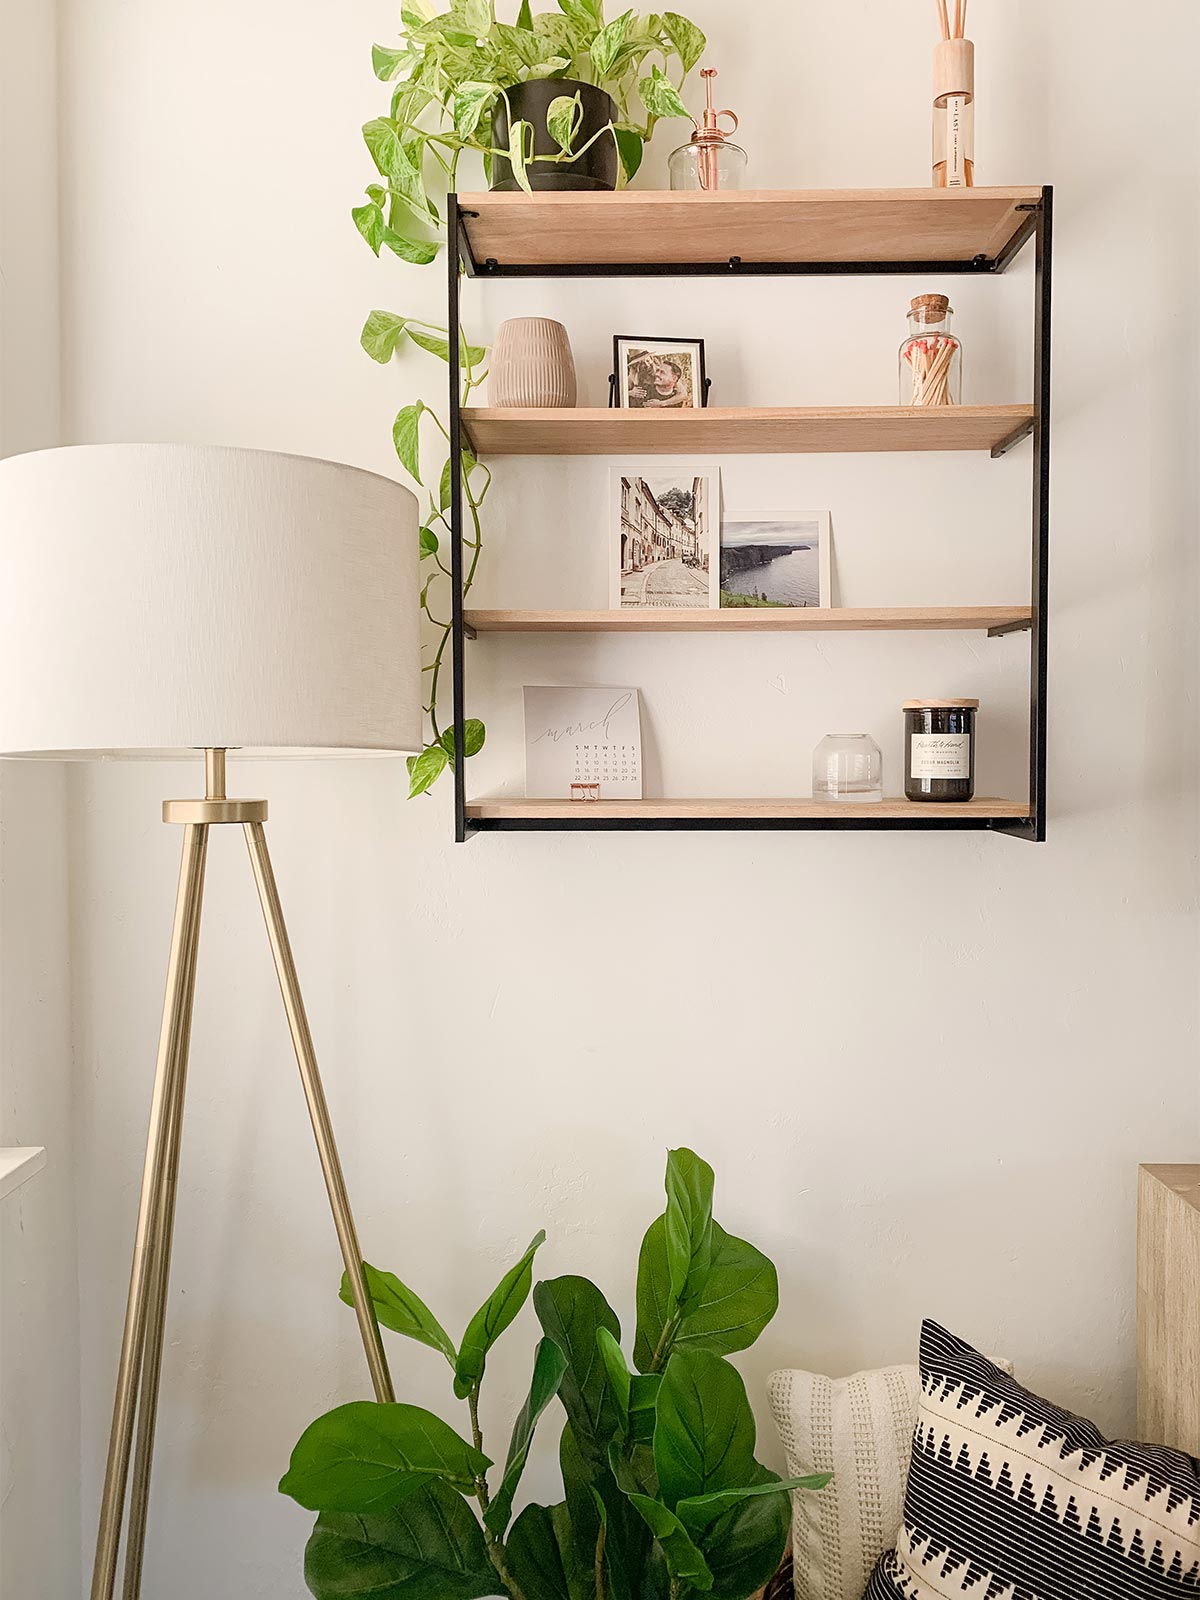 Floating bookshelf lined with Artifact uprising photo prints, decorative items, and a pothos plant